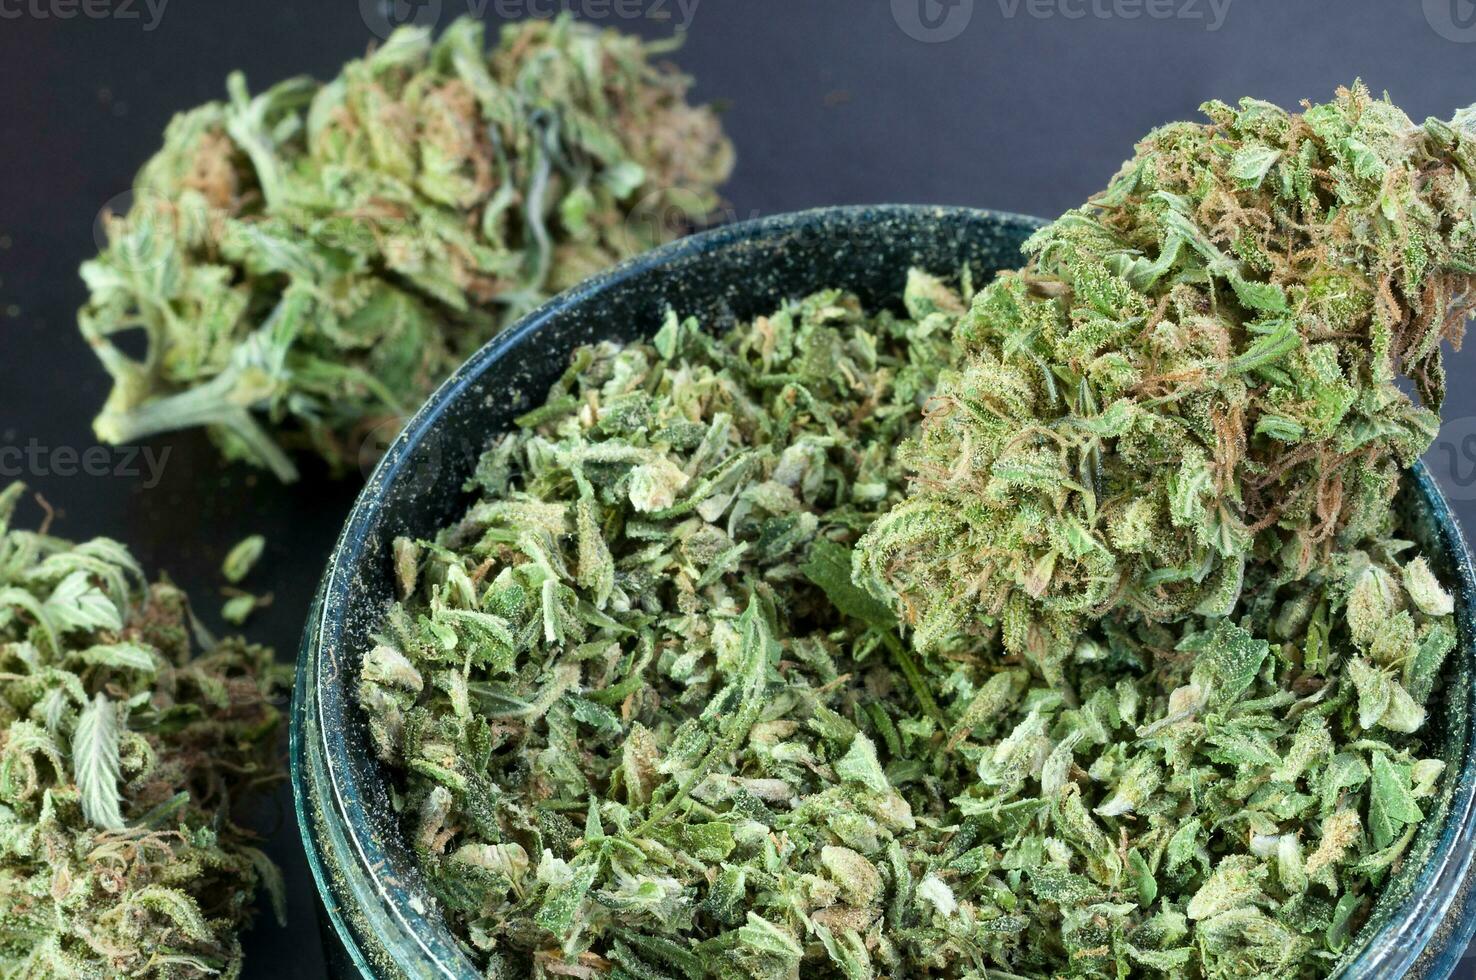 dry flowers of medical marijuana and grinder full of crushed buds close up on black background photo